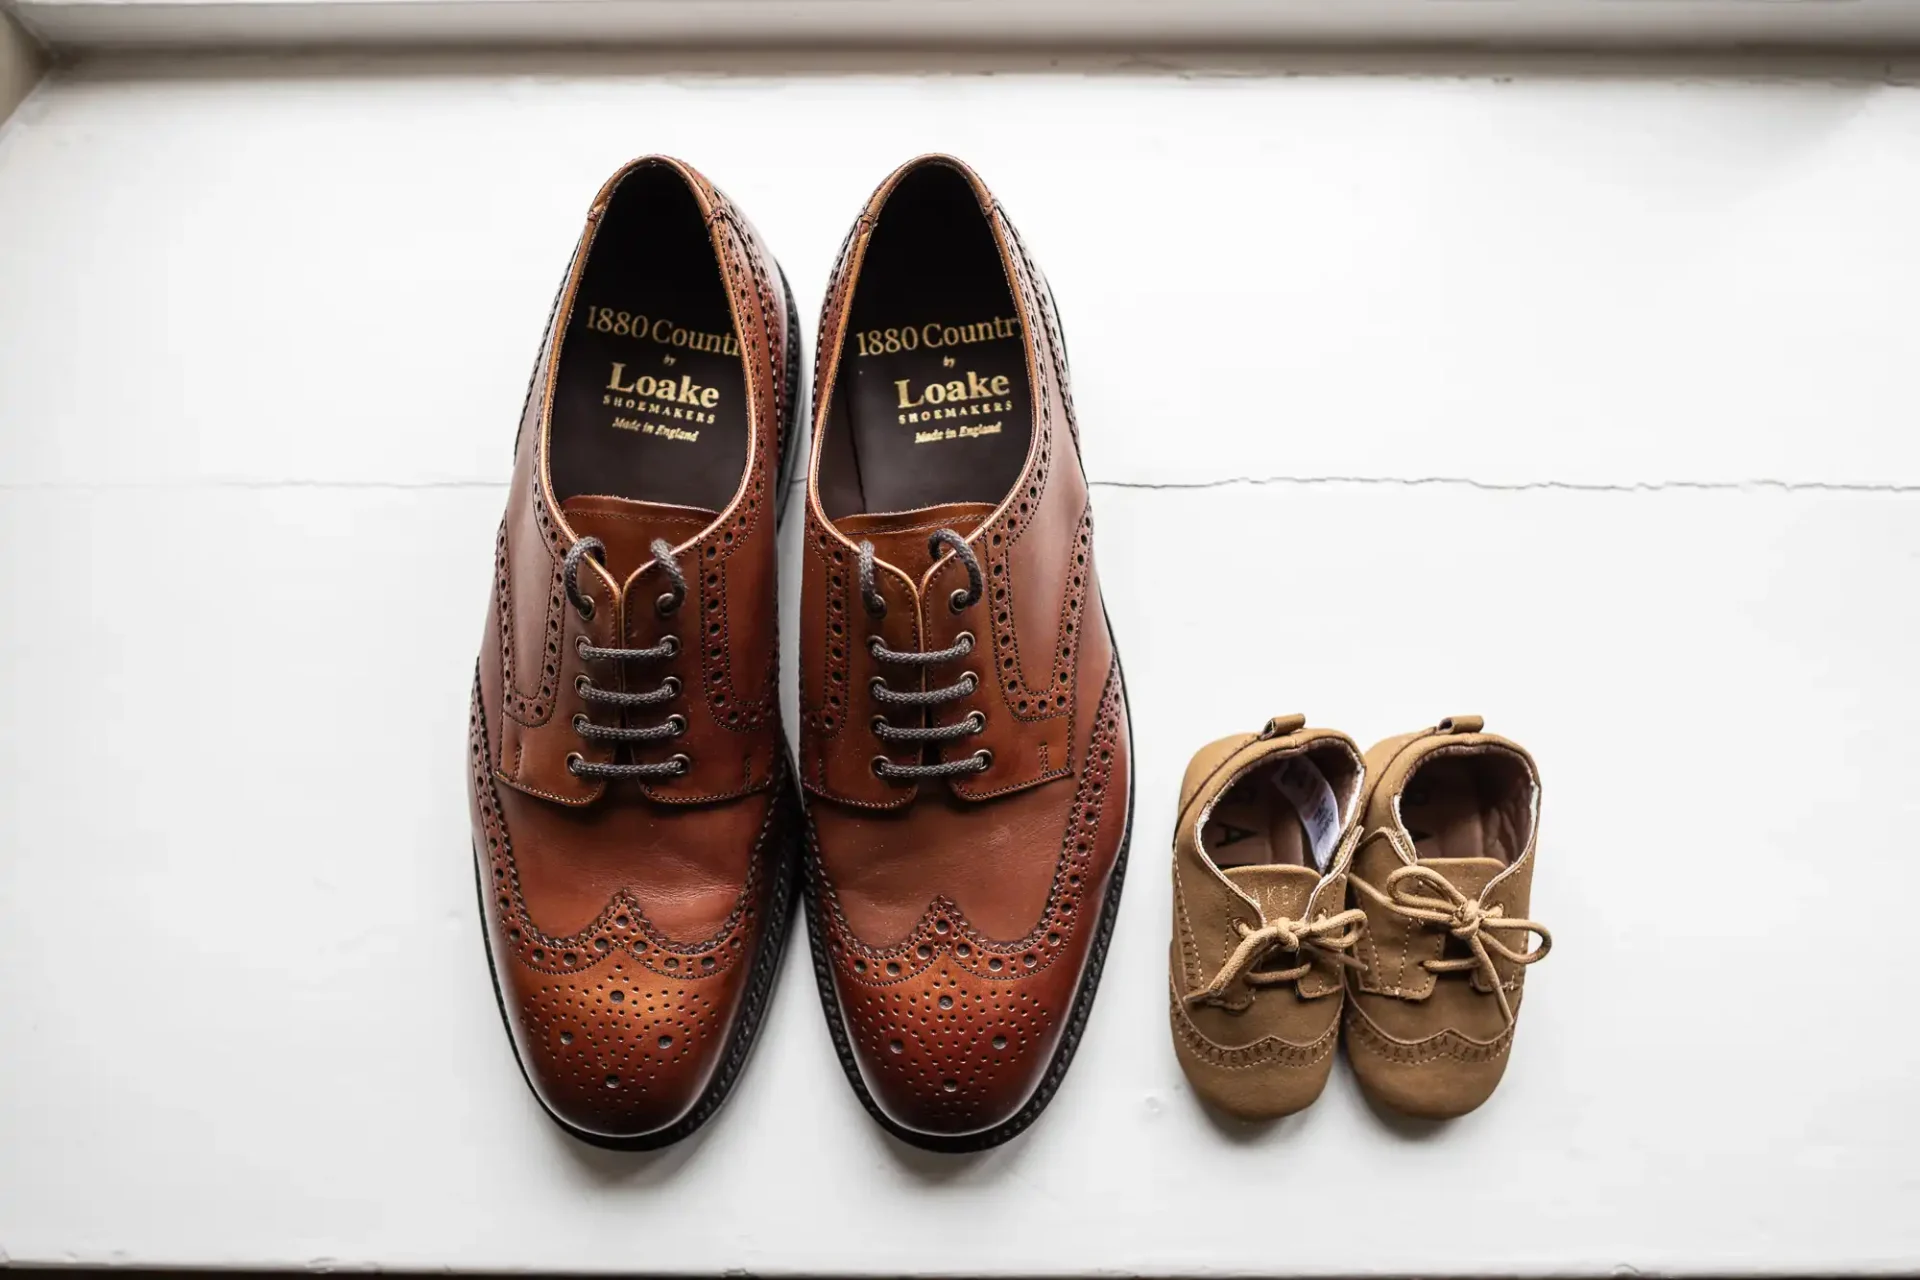 A pair of brown adult dress shoes is placed next to a smaller pair of tan baby moccasins on a white surface.